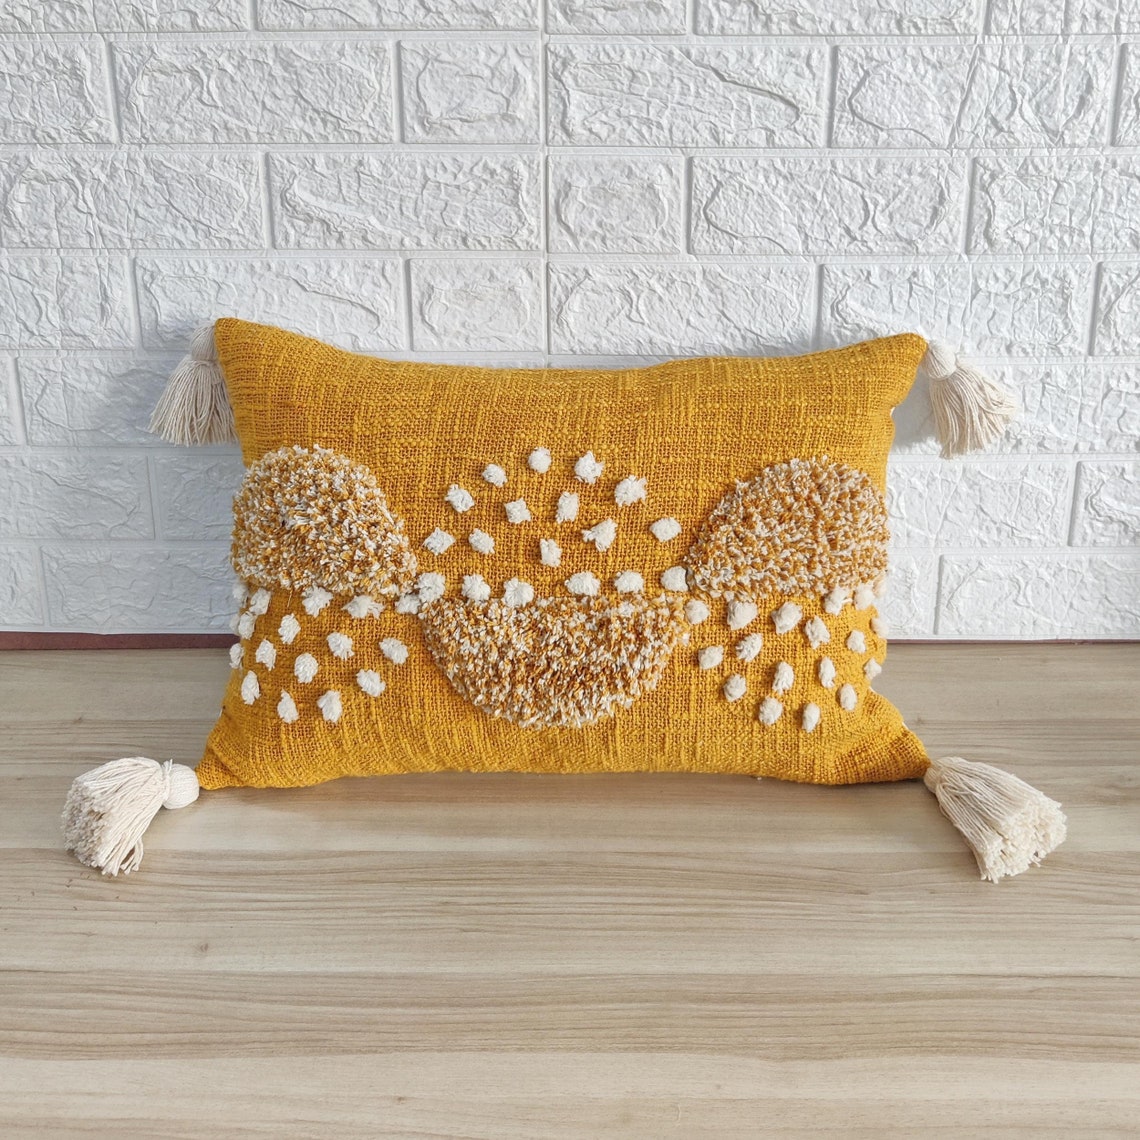 Mustard Yellow & Ivory Hand Embroidered Tufted Textured Cotton cushion cover